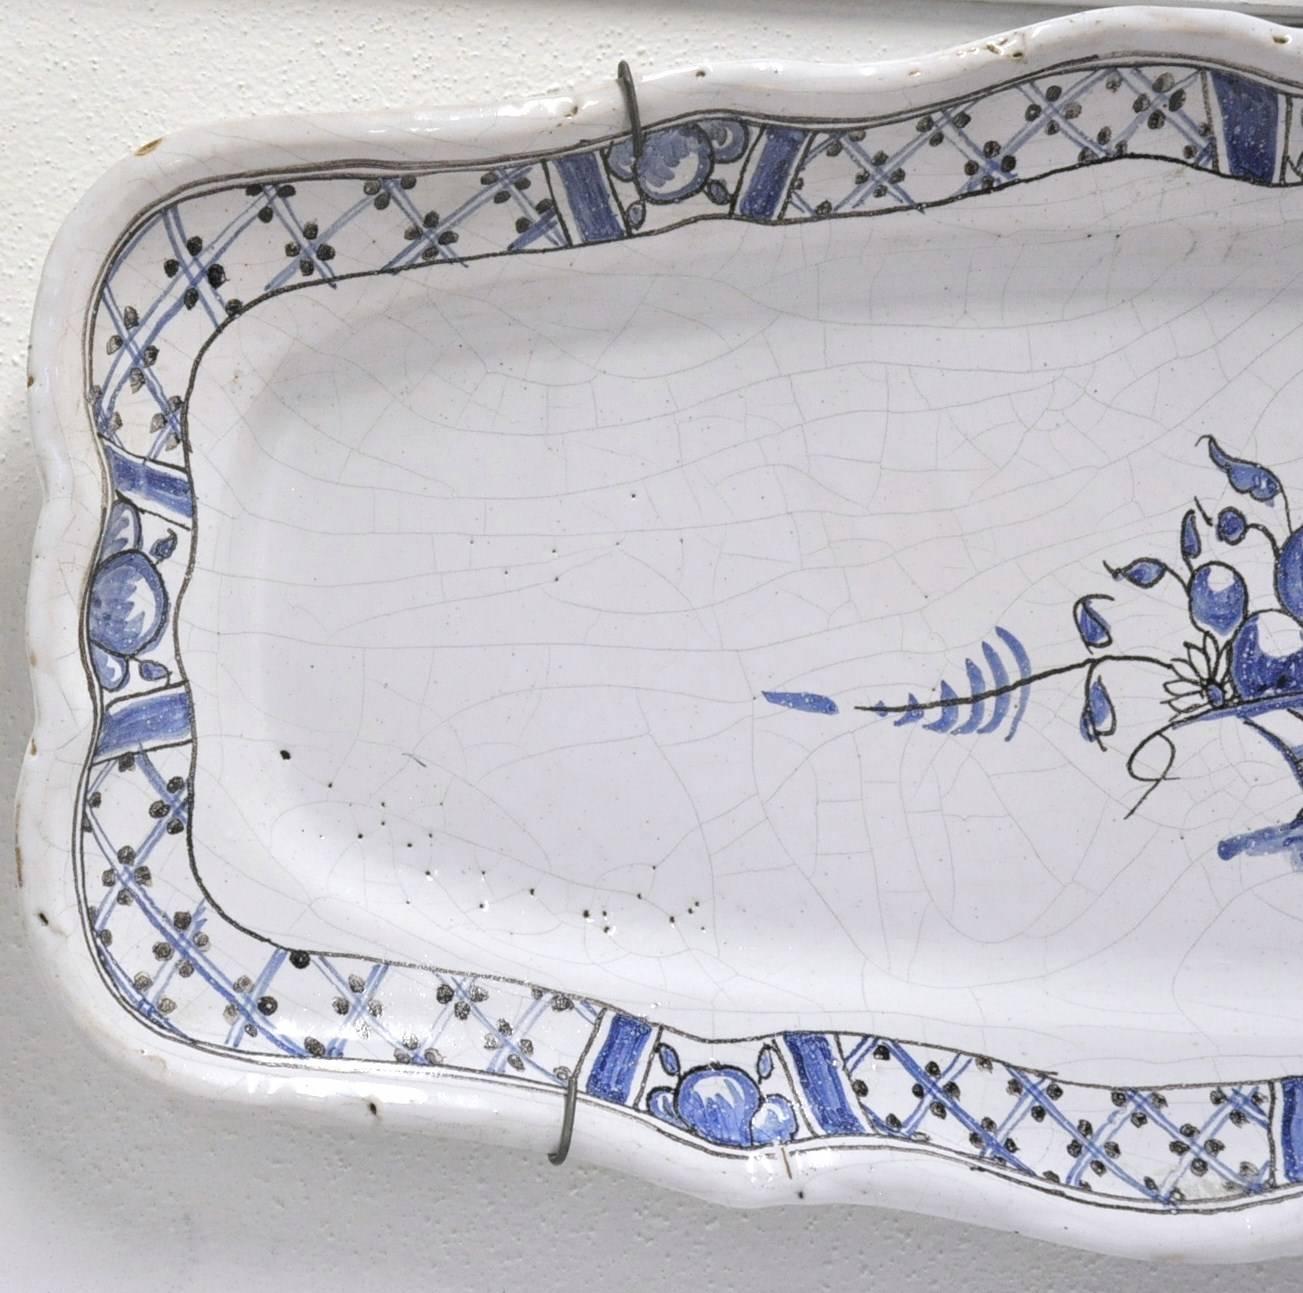 Hand-Crafted Large 19th Century French Blue and White Faience Platter from Rouen Normandy